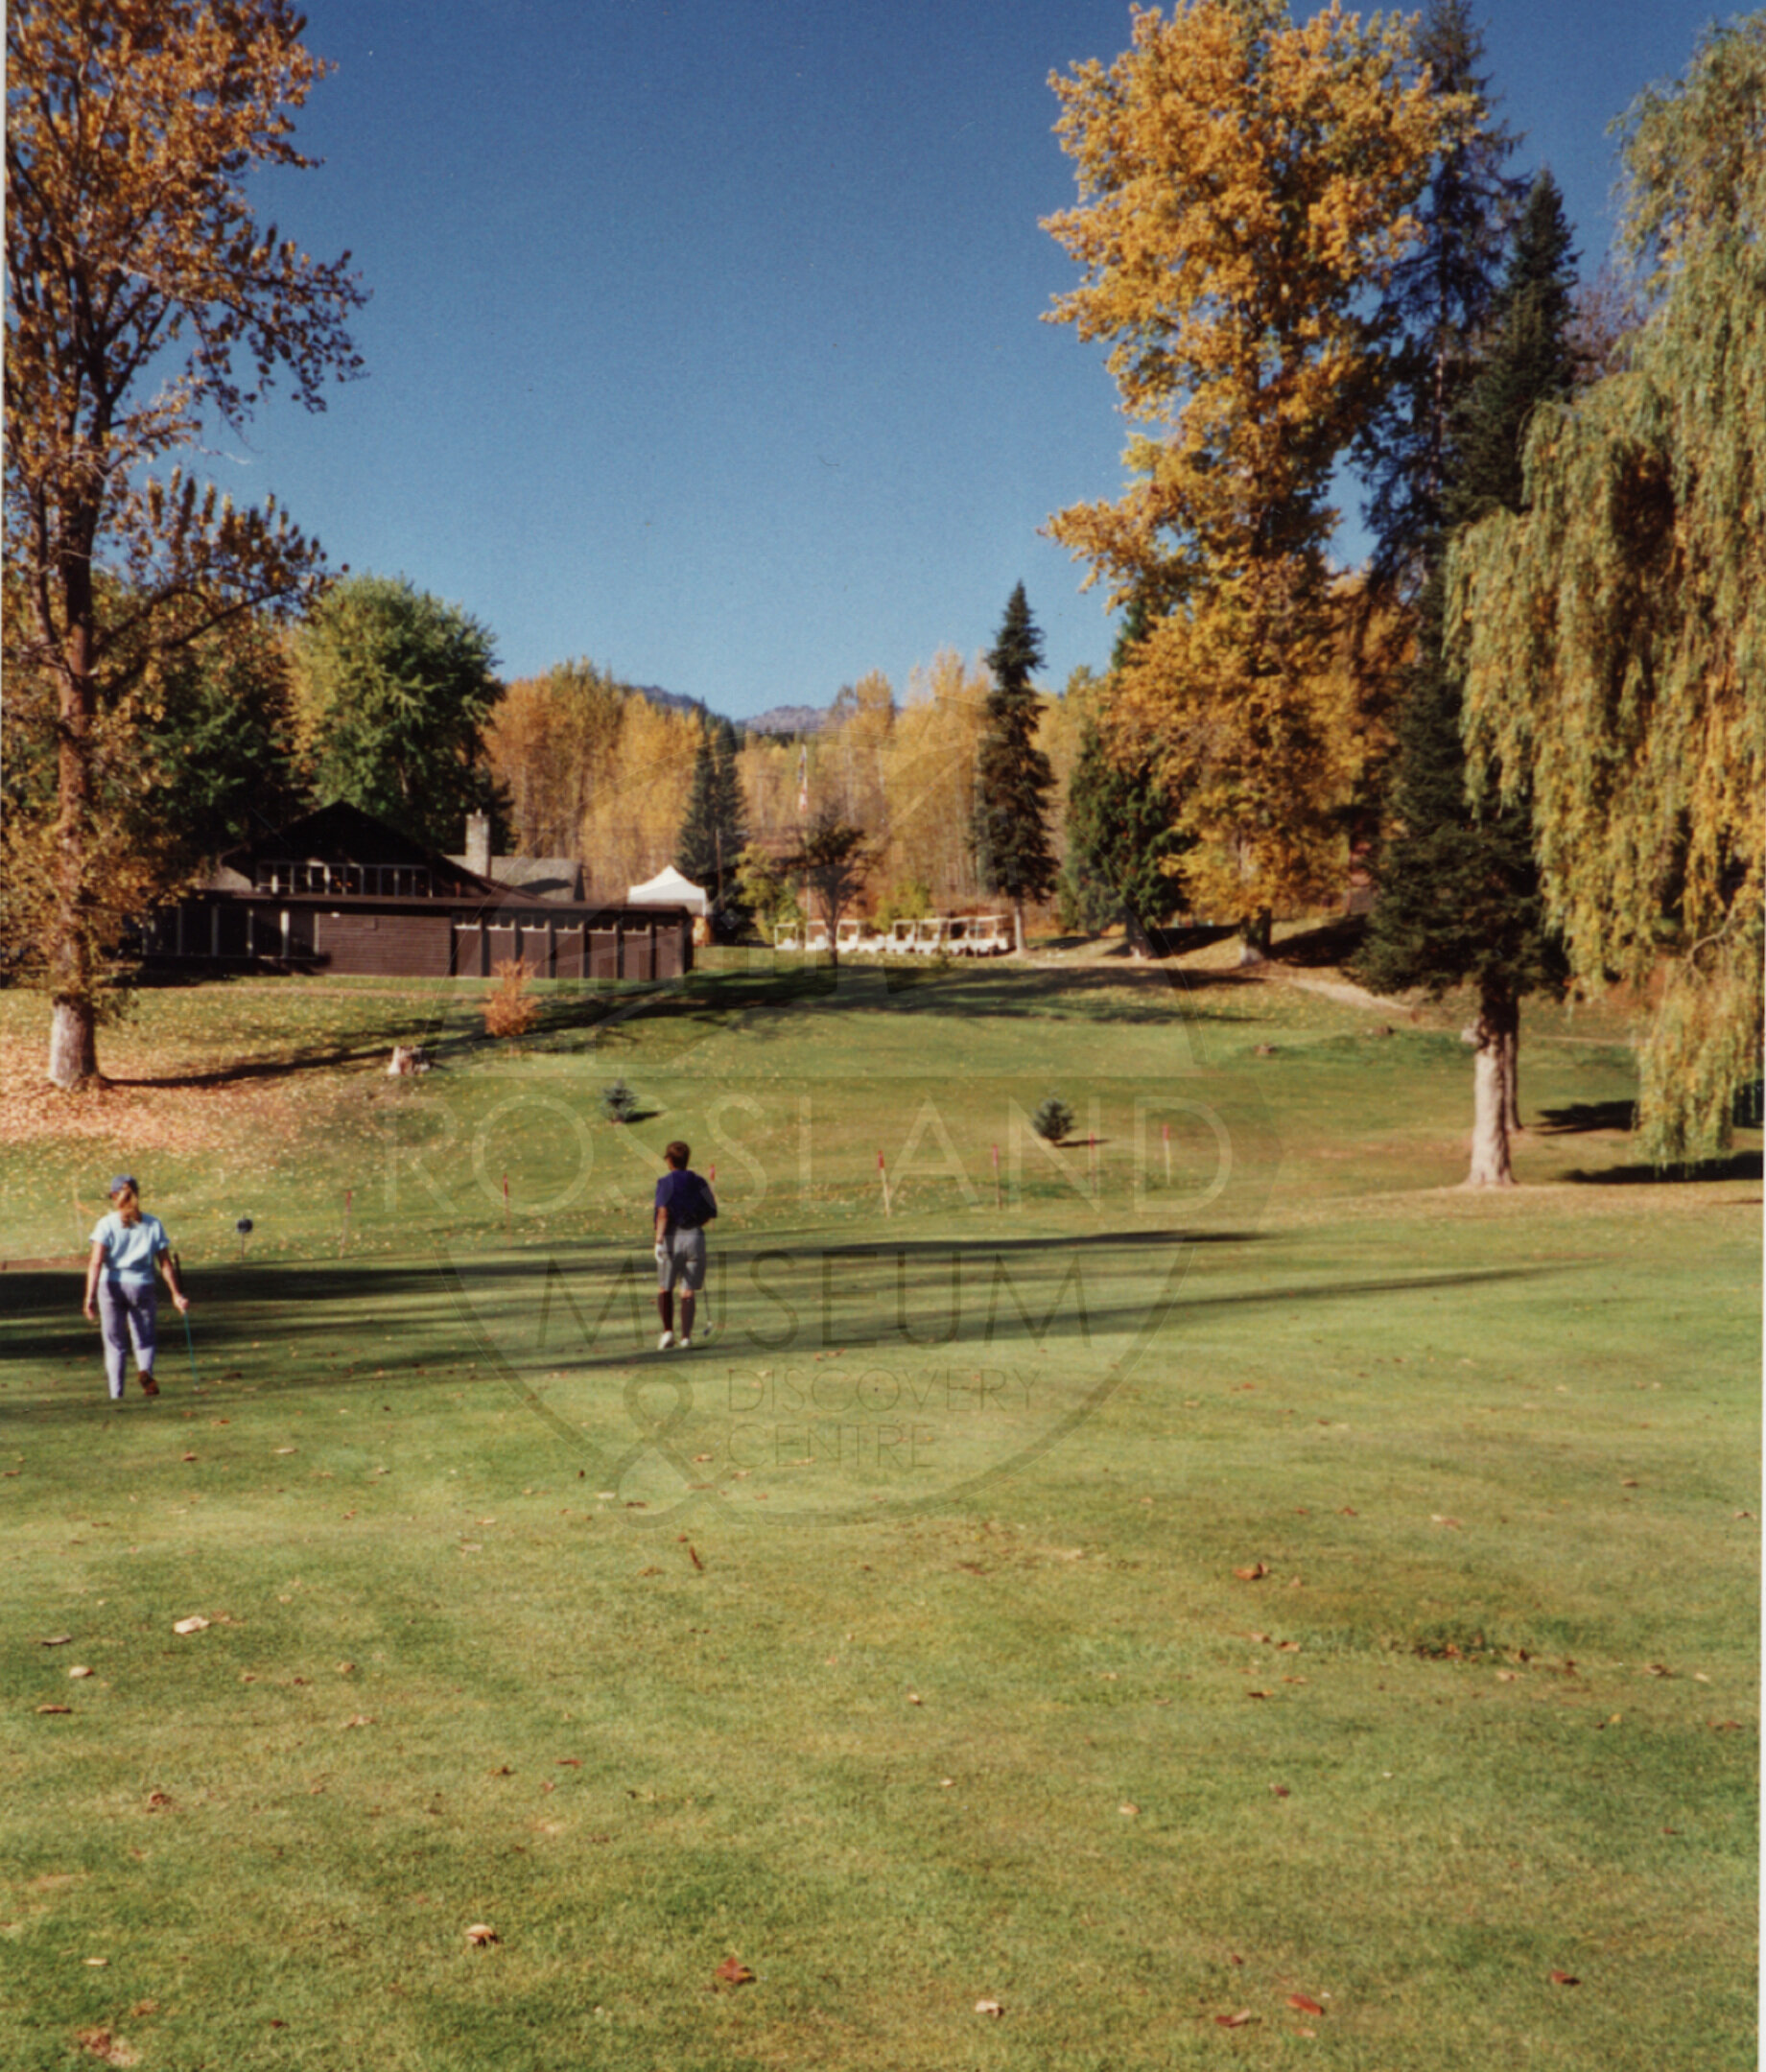 Libby Martin's Collection - Rossland Golf Course, 1996